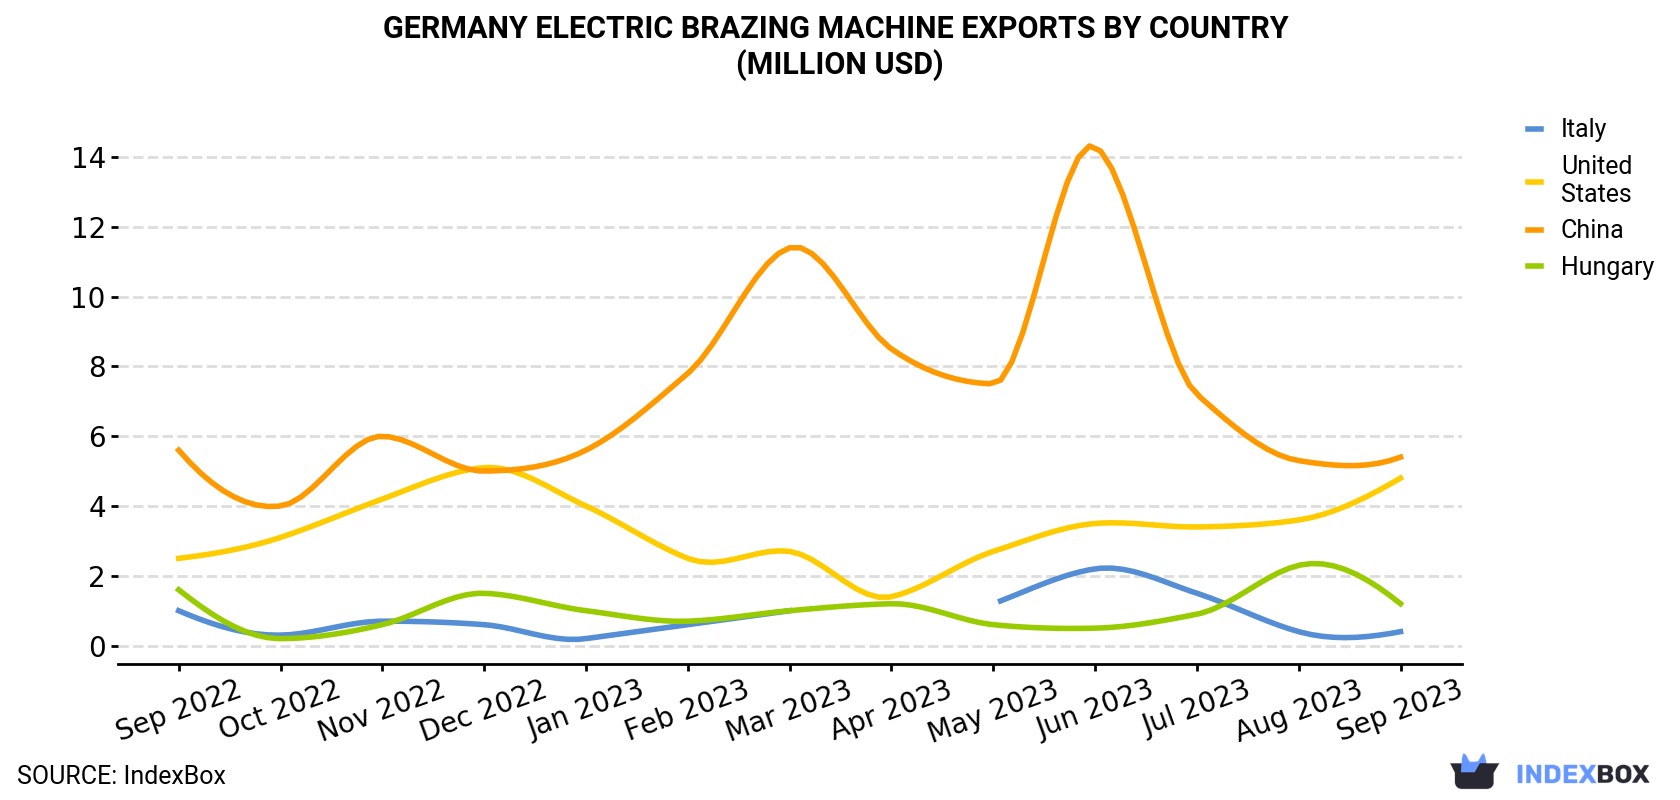 Germany Electric Brazing Machine Exports By Country (Million USD)